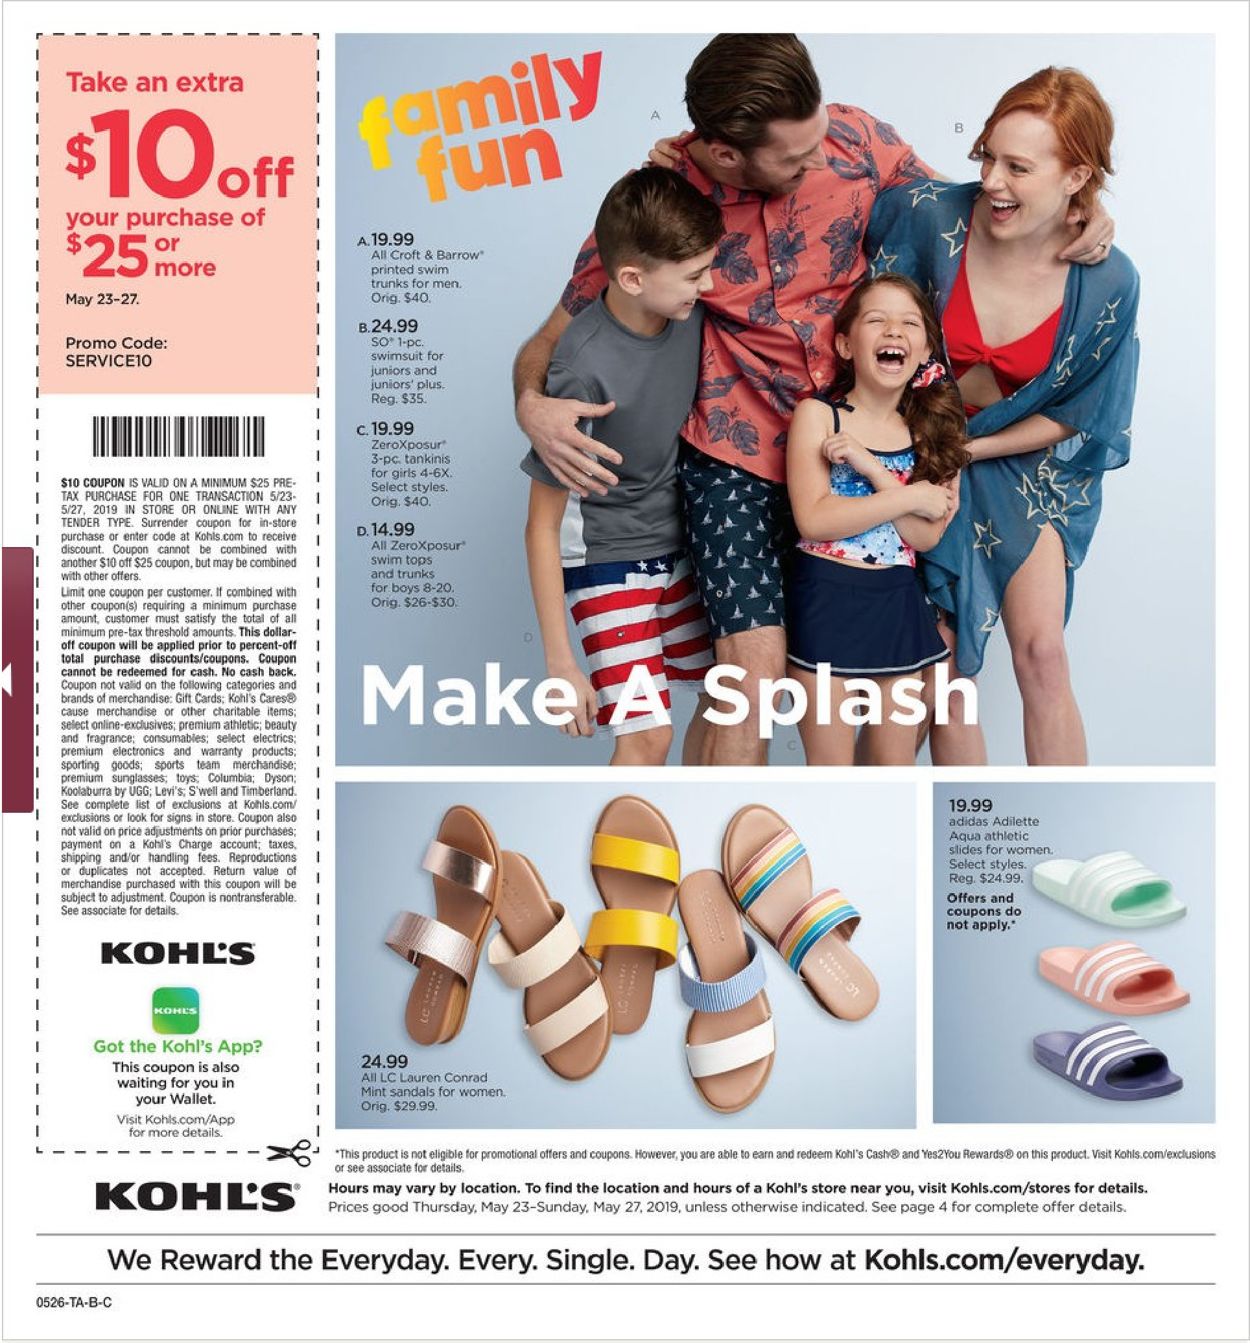 Kohl's Current weekly ad 05/23 - 05/27/2019 [8] - frequent-ads.com